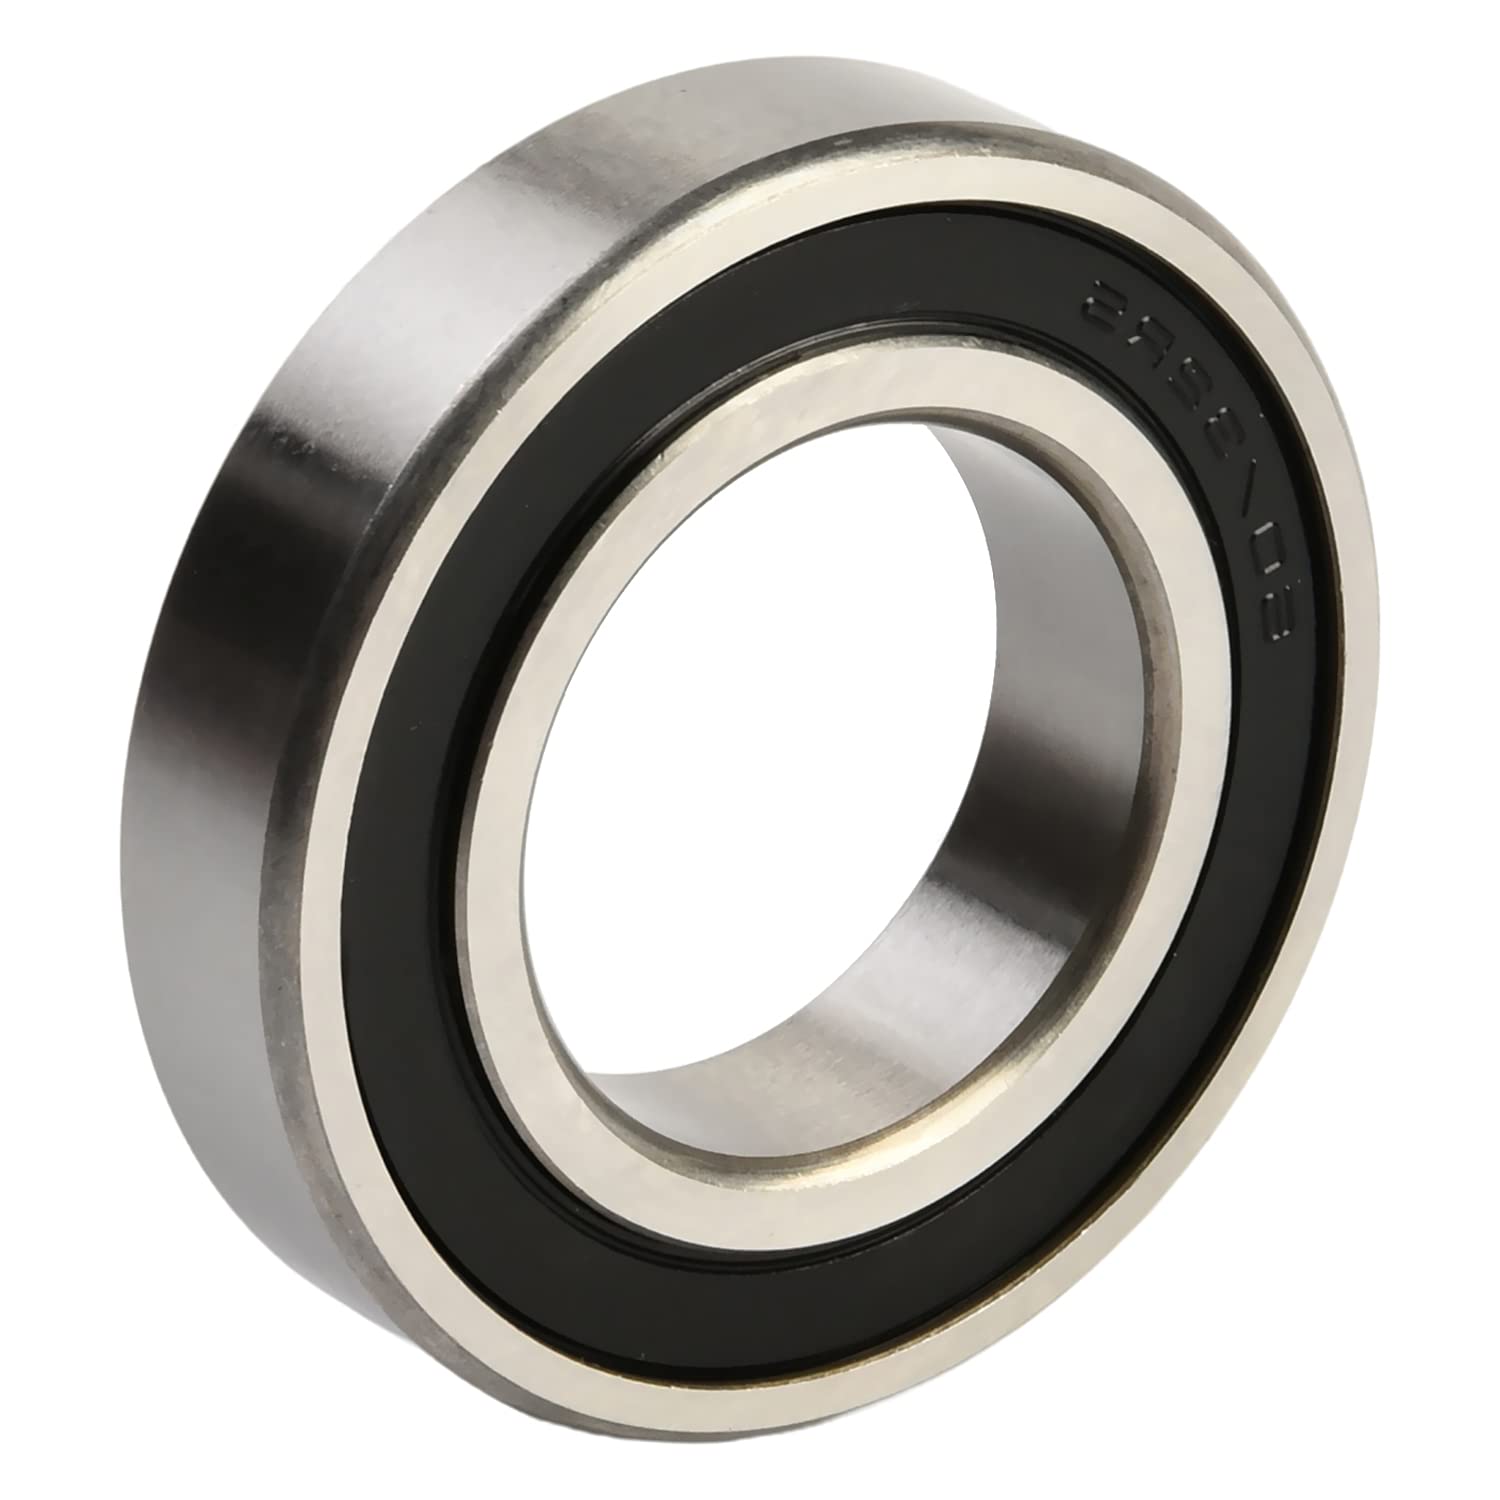 6808-2RS Deep Groove Ball Bearing 40x52x7mm(Inner Dia:40mm Outer Dia:52mm Thickness:7mm)GCr15 P0 Z1 